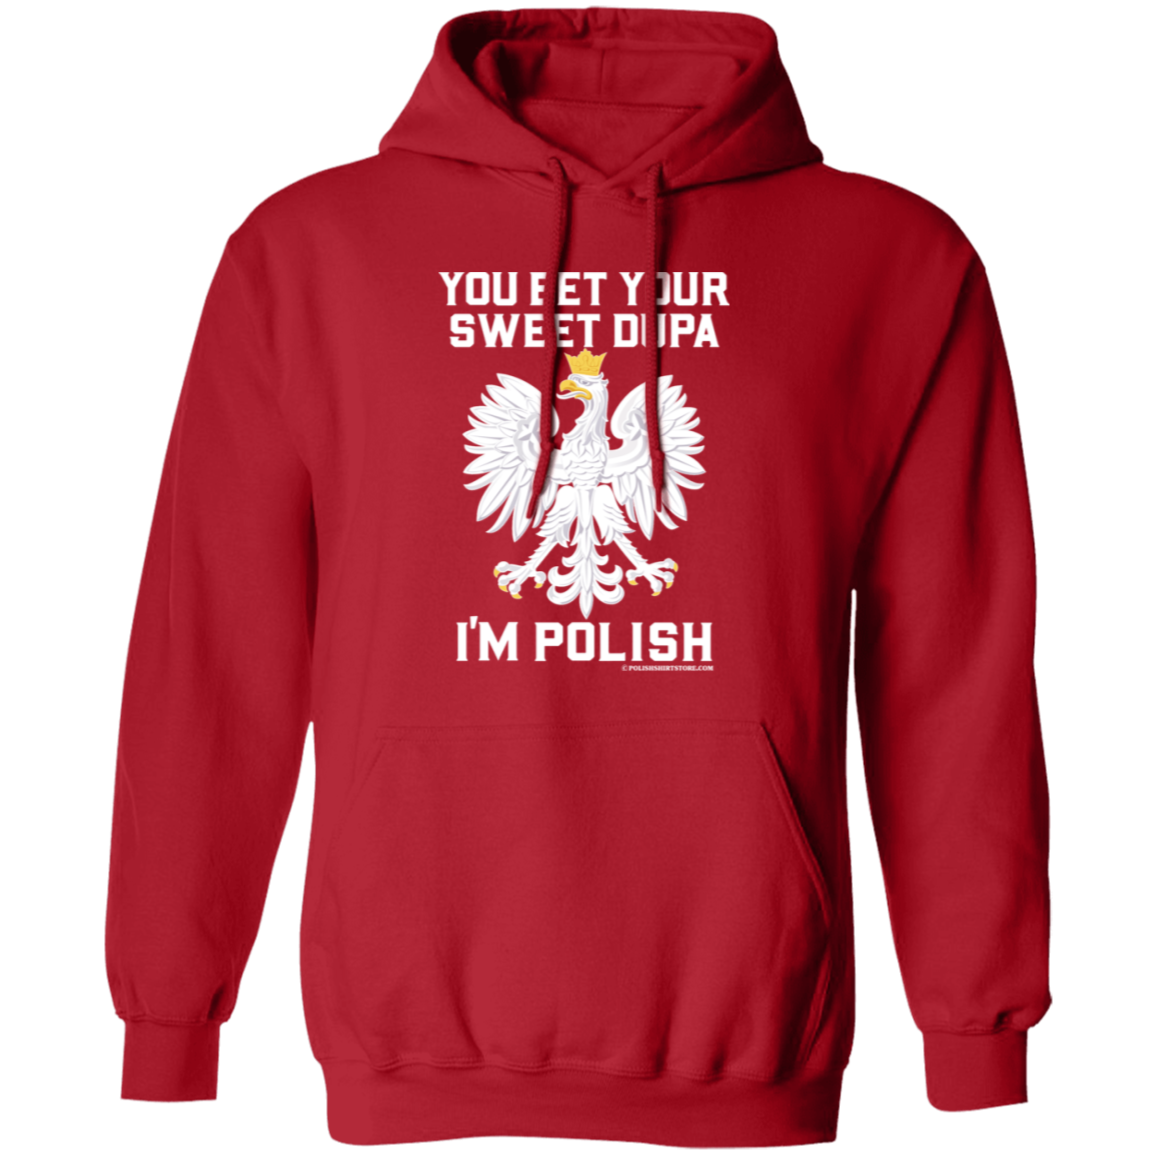 You Bet Your Sweet Dupa I'm Polish - New Apparel CustomCat G185 Pullover Hoodie Red S